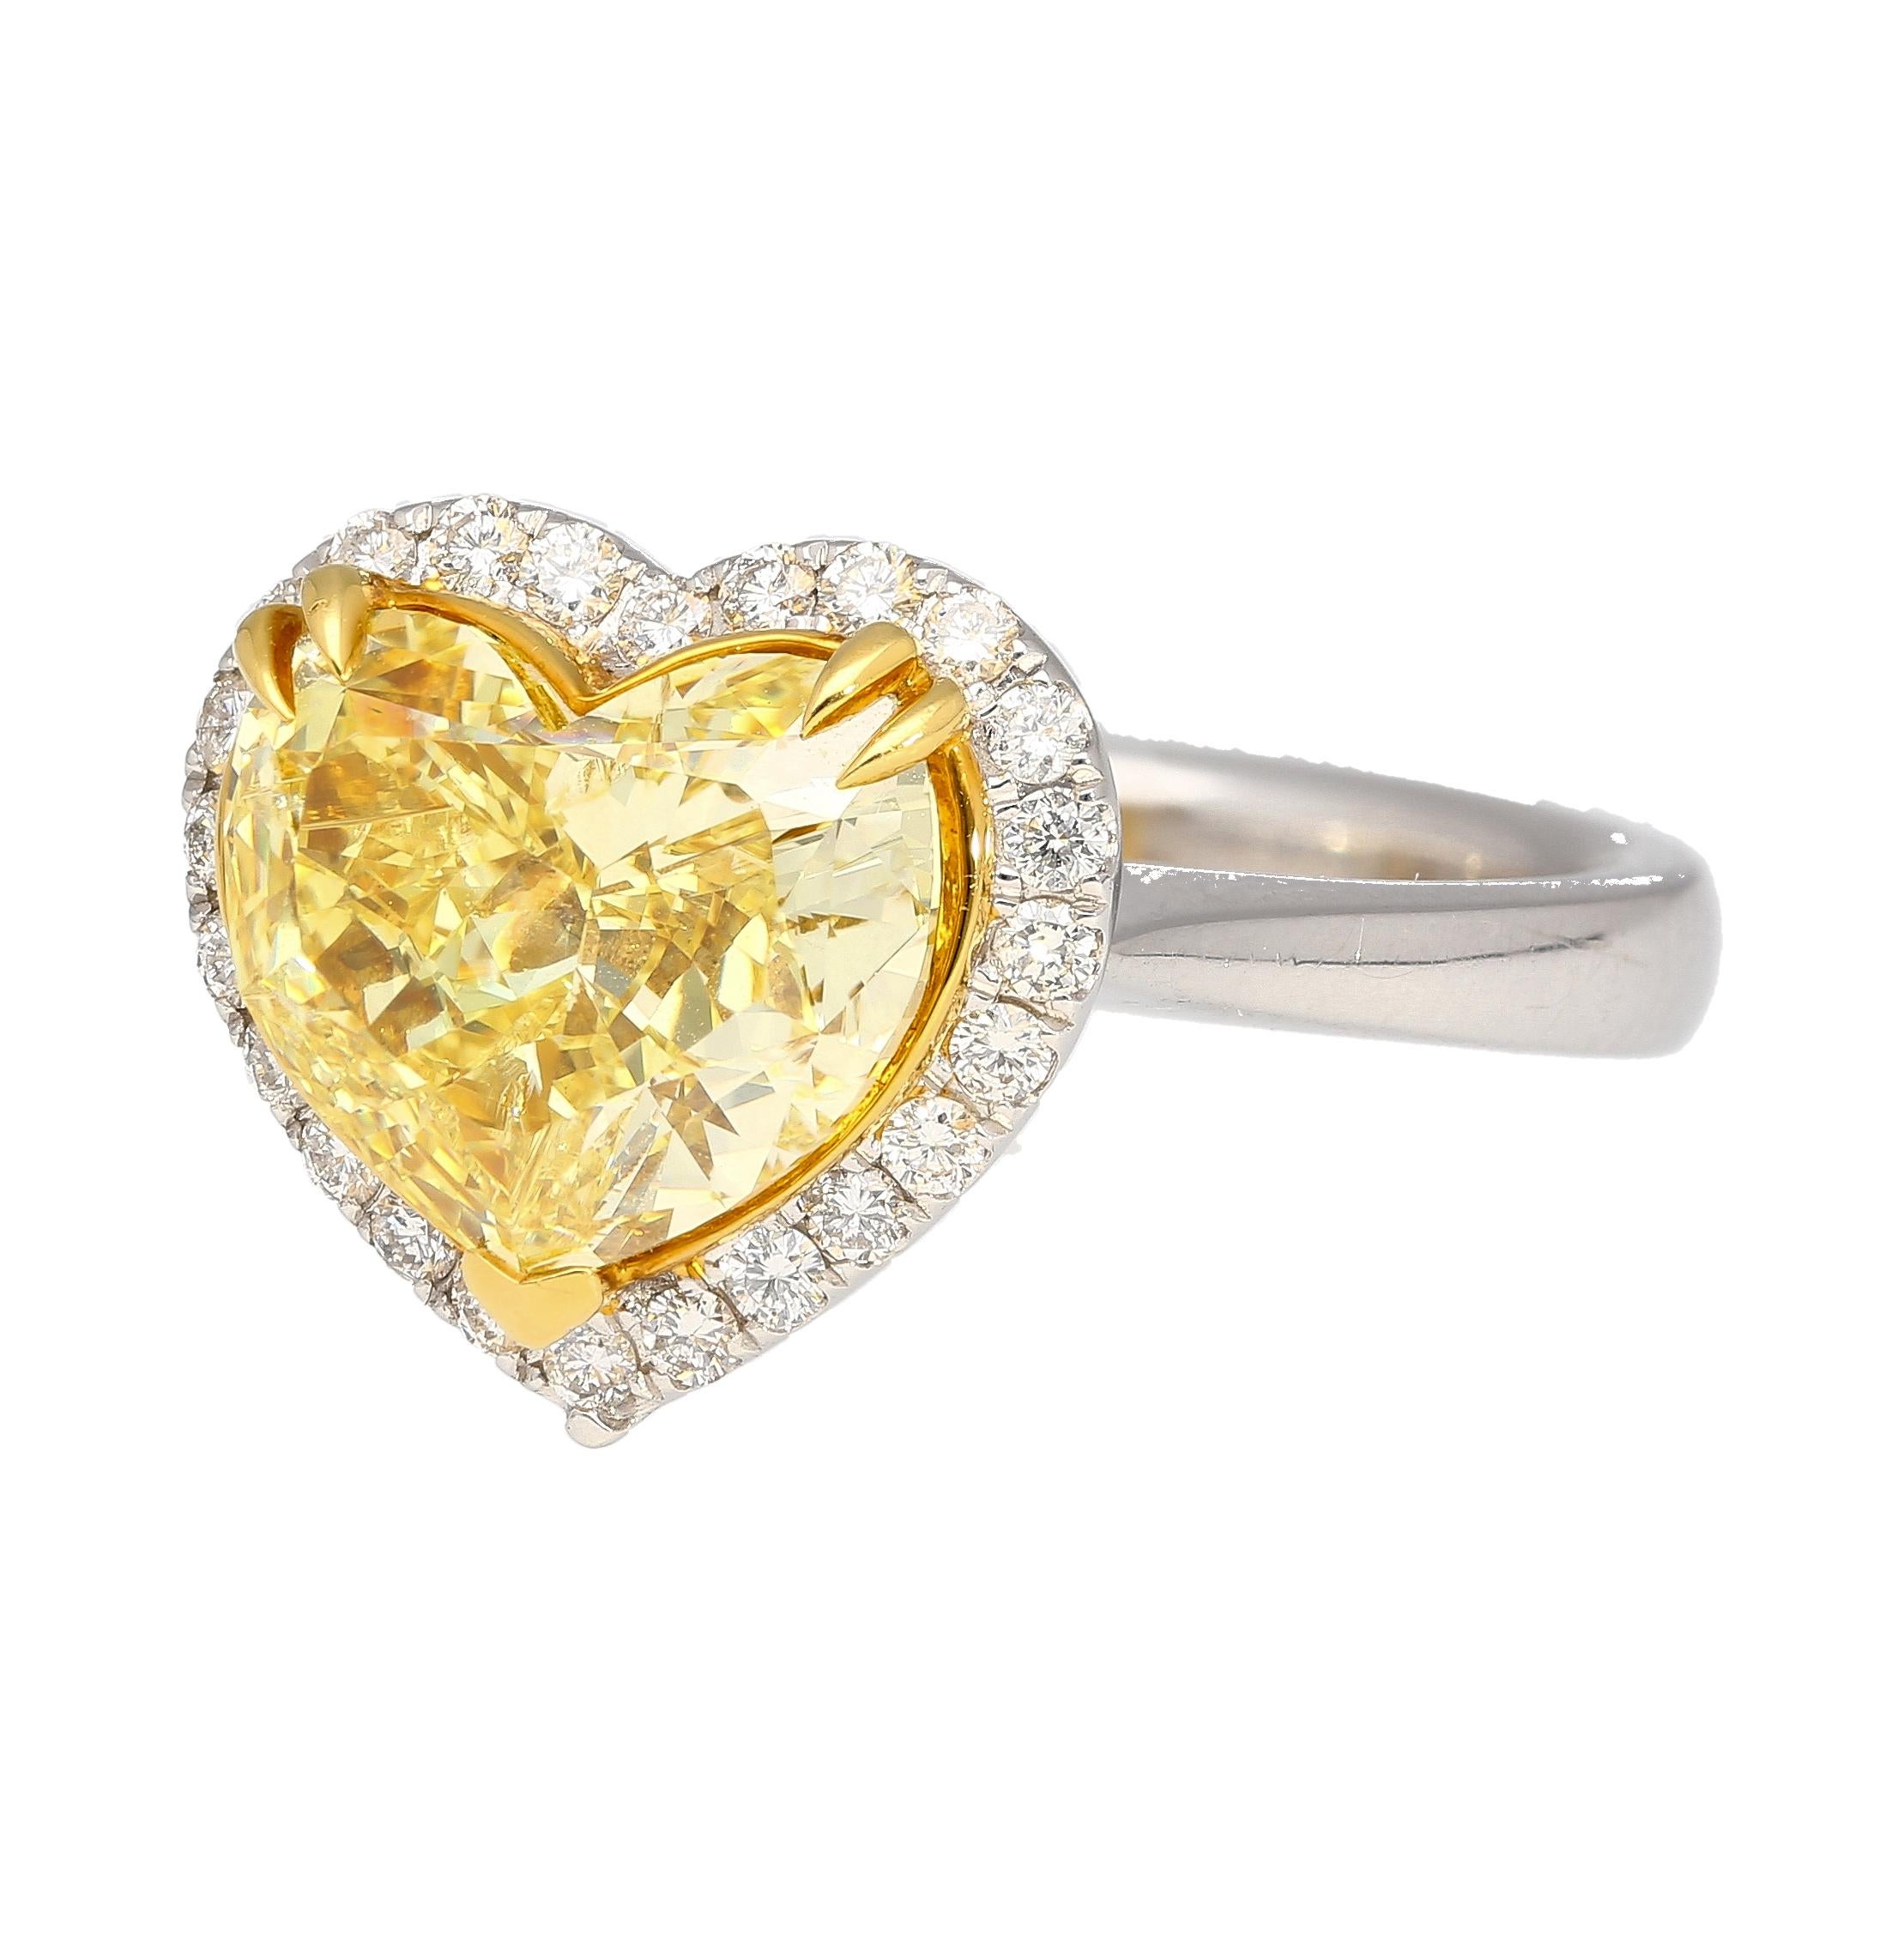 GIA certified 3.32 carat Fancy Intense Yellow natural diamond engagement ring with a round cut white diamond halo. Set in 18 karat solid white and yellow gold. The center stone is a true investment piece. Heart cut, GIA certified, and radiating with